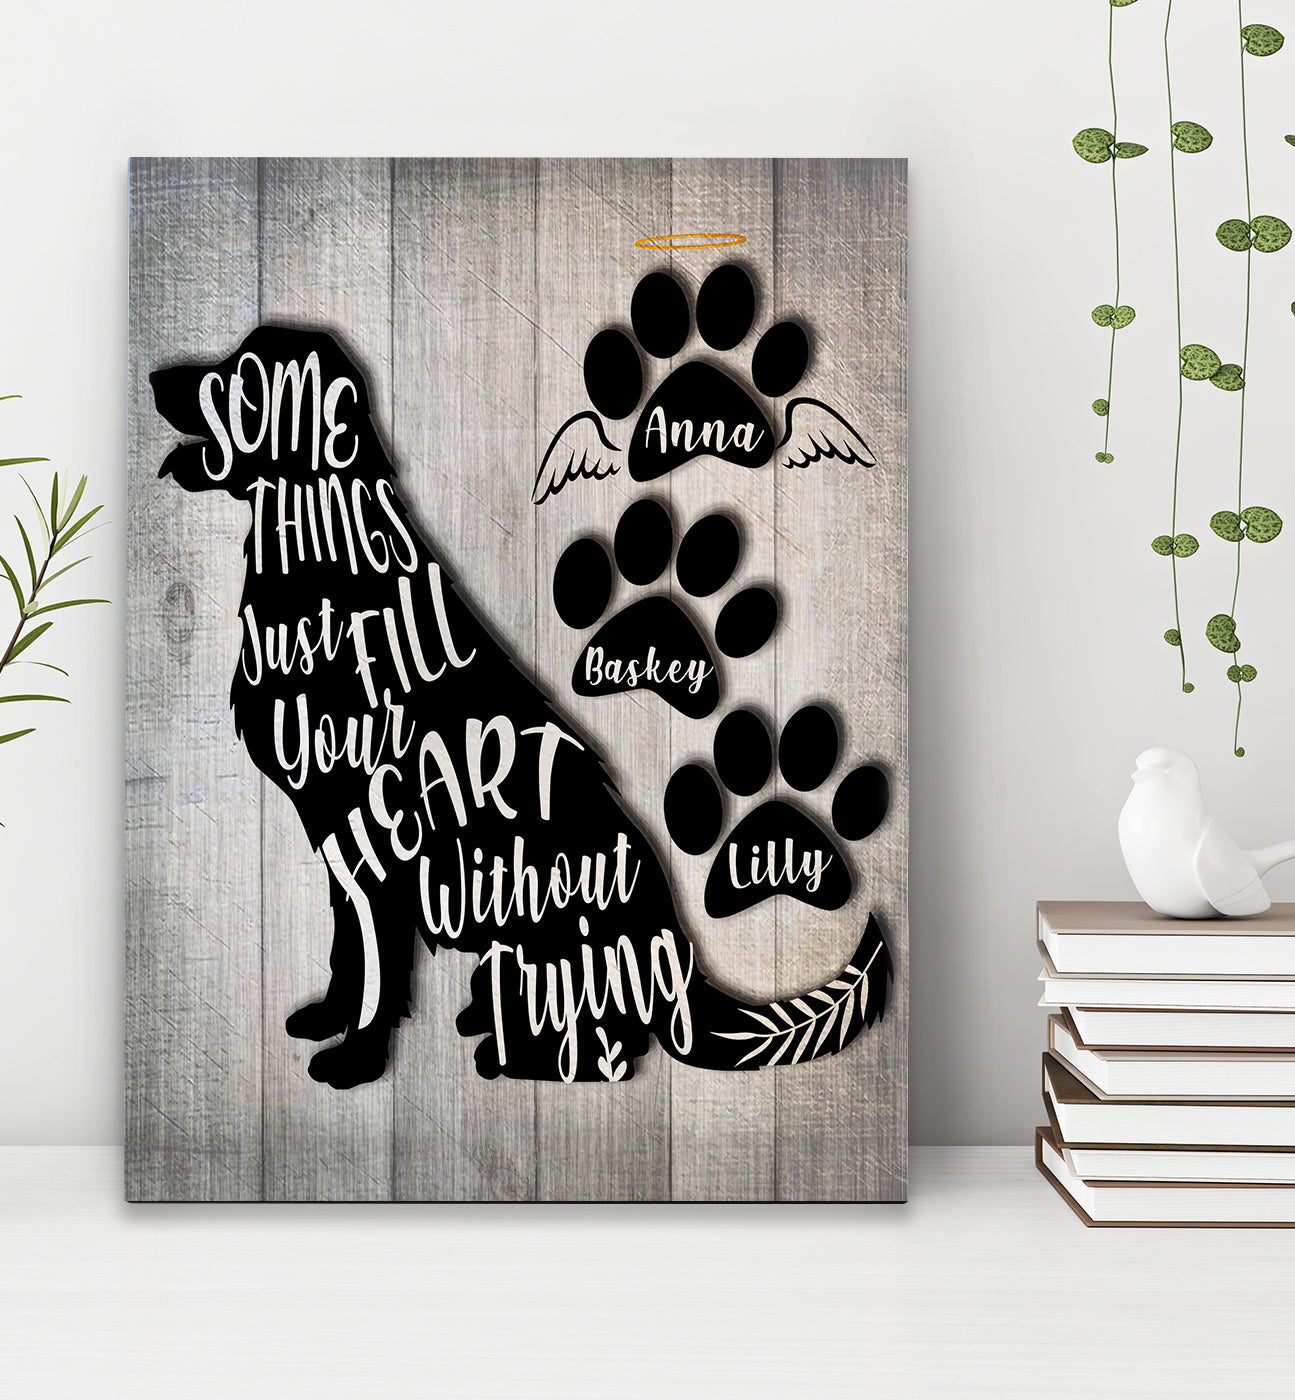 Dogs Fill Your Heart - Personalized gifts family friend memorial gift dog lover gift canvas